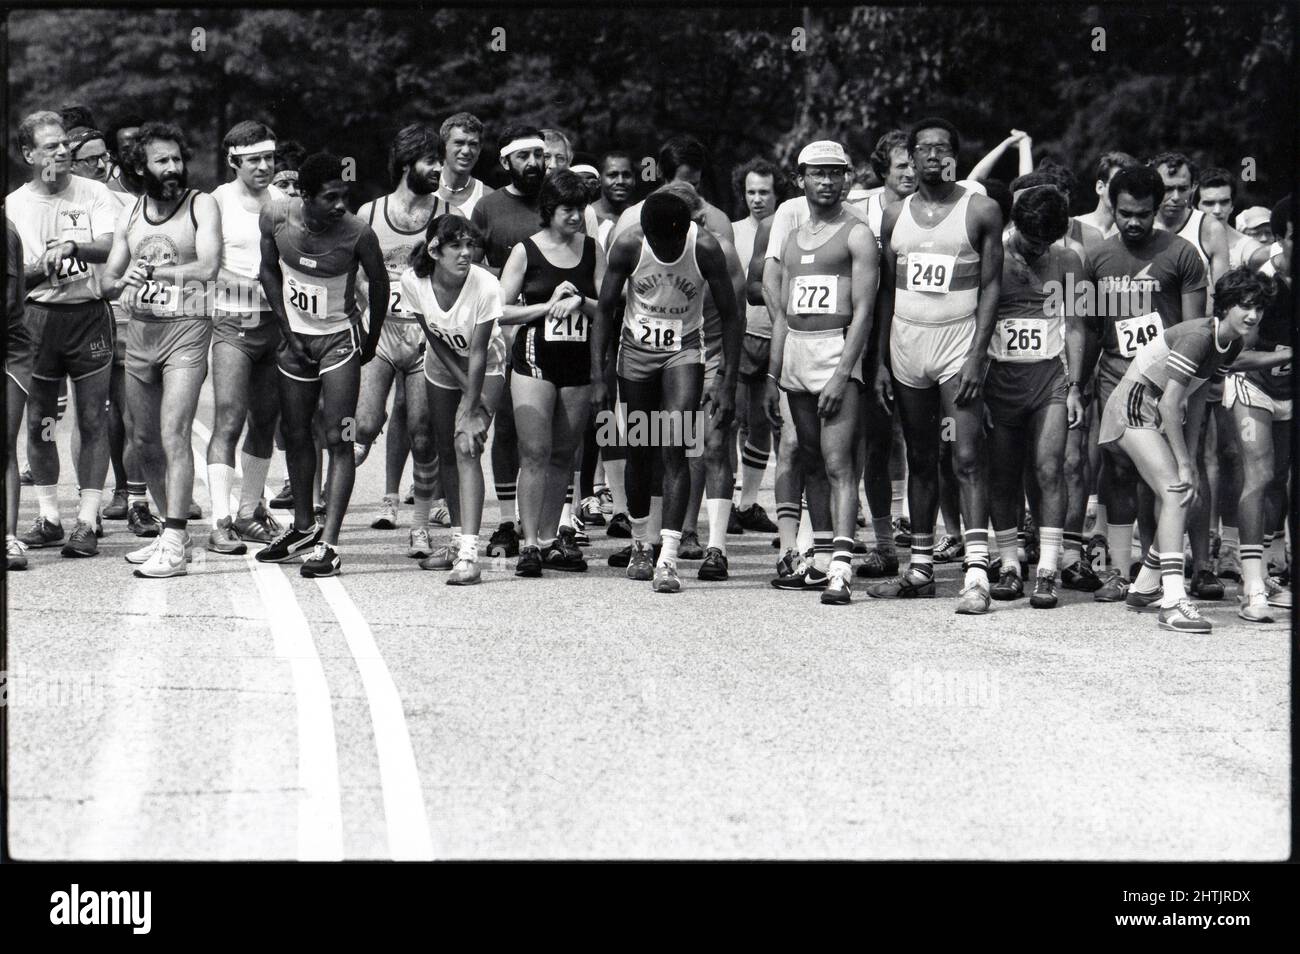 A diverse group of men and women await the starting gun to begin a middle distance race in Prospect Park, Brooklyn, New York. In 1981. Stock Photo